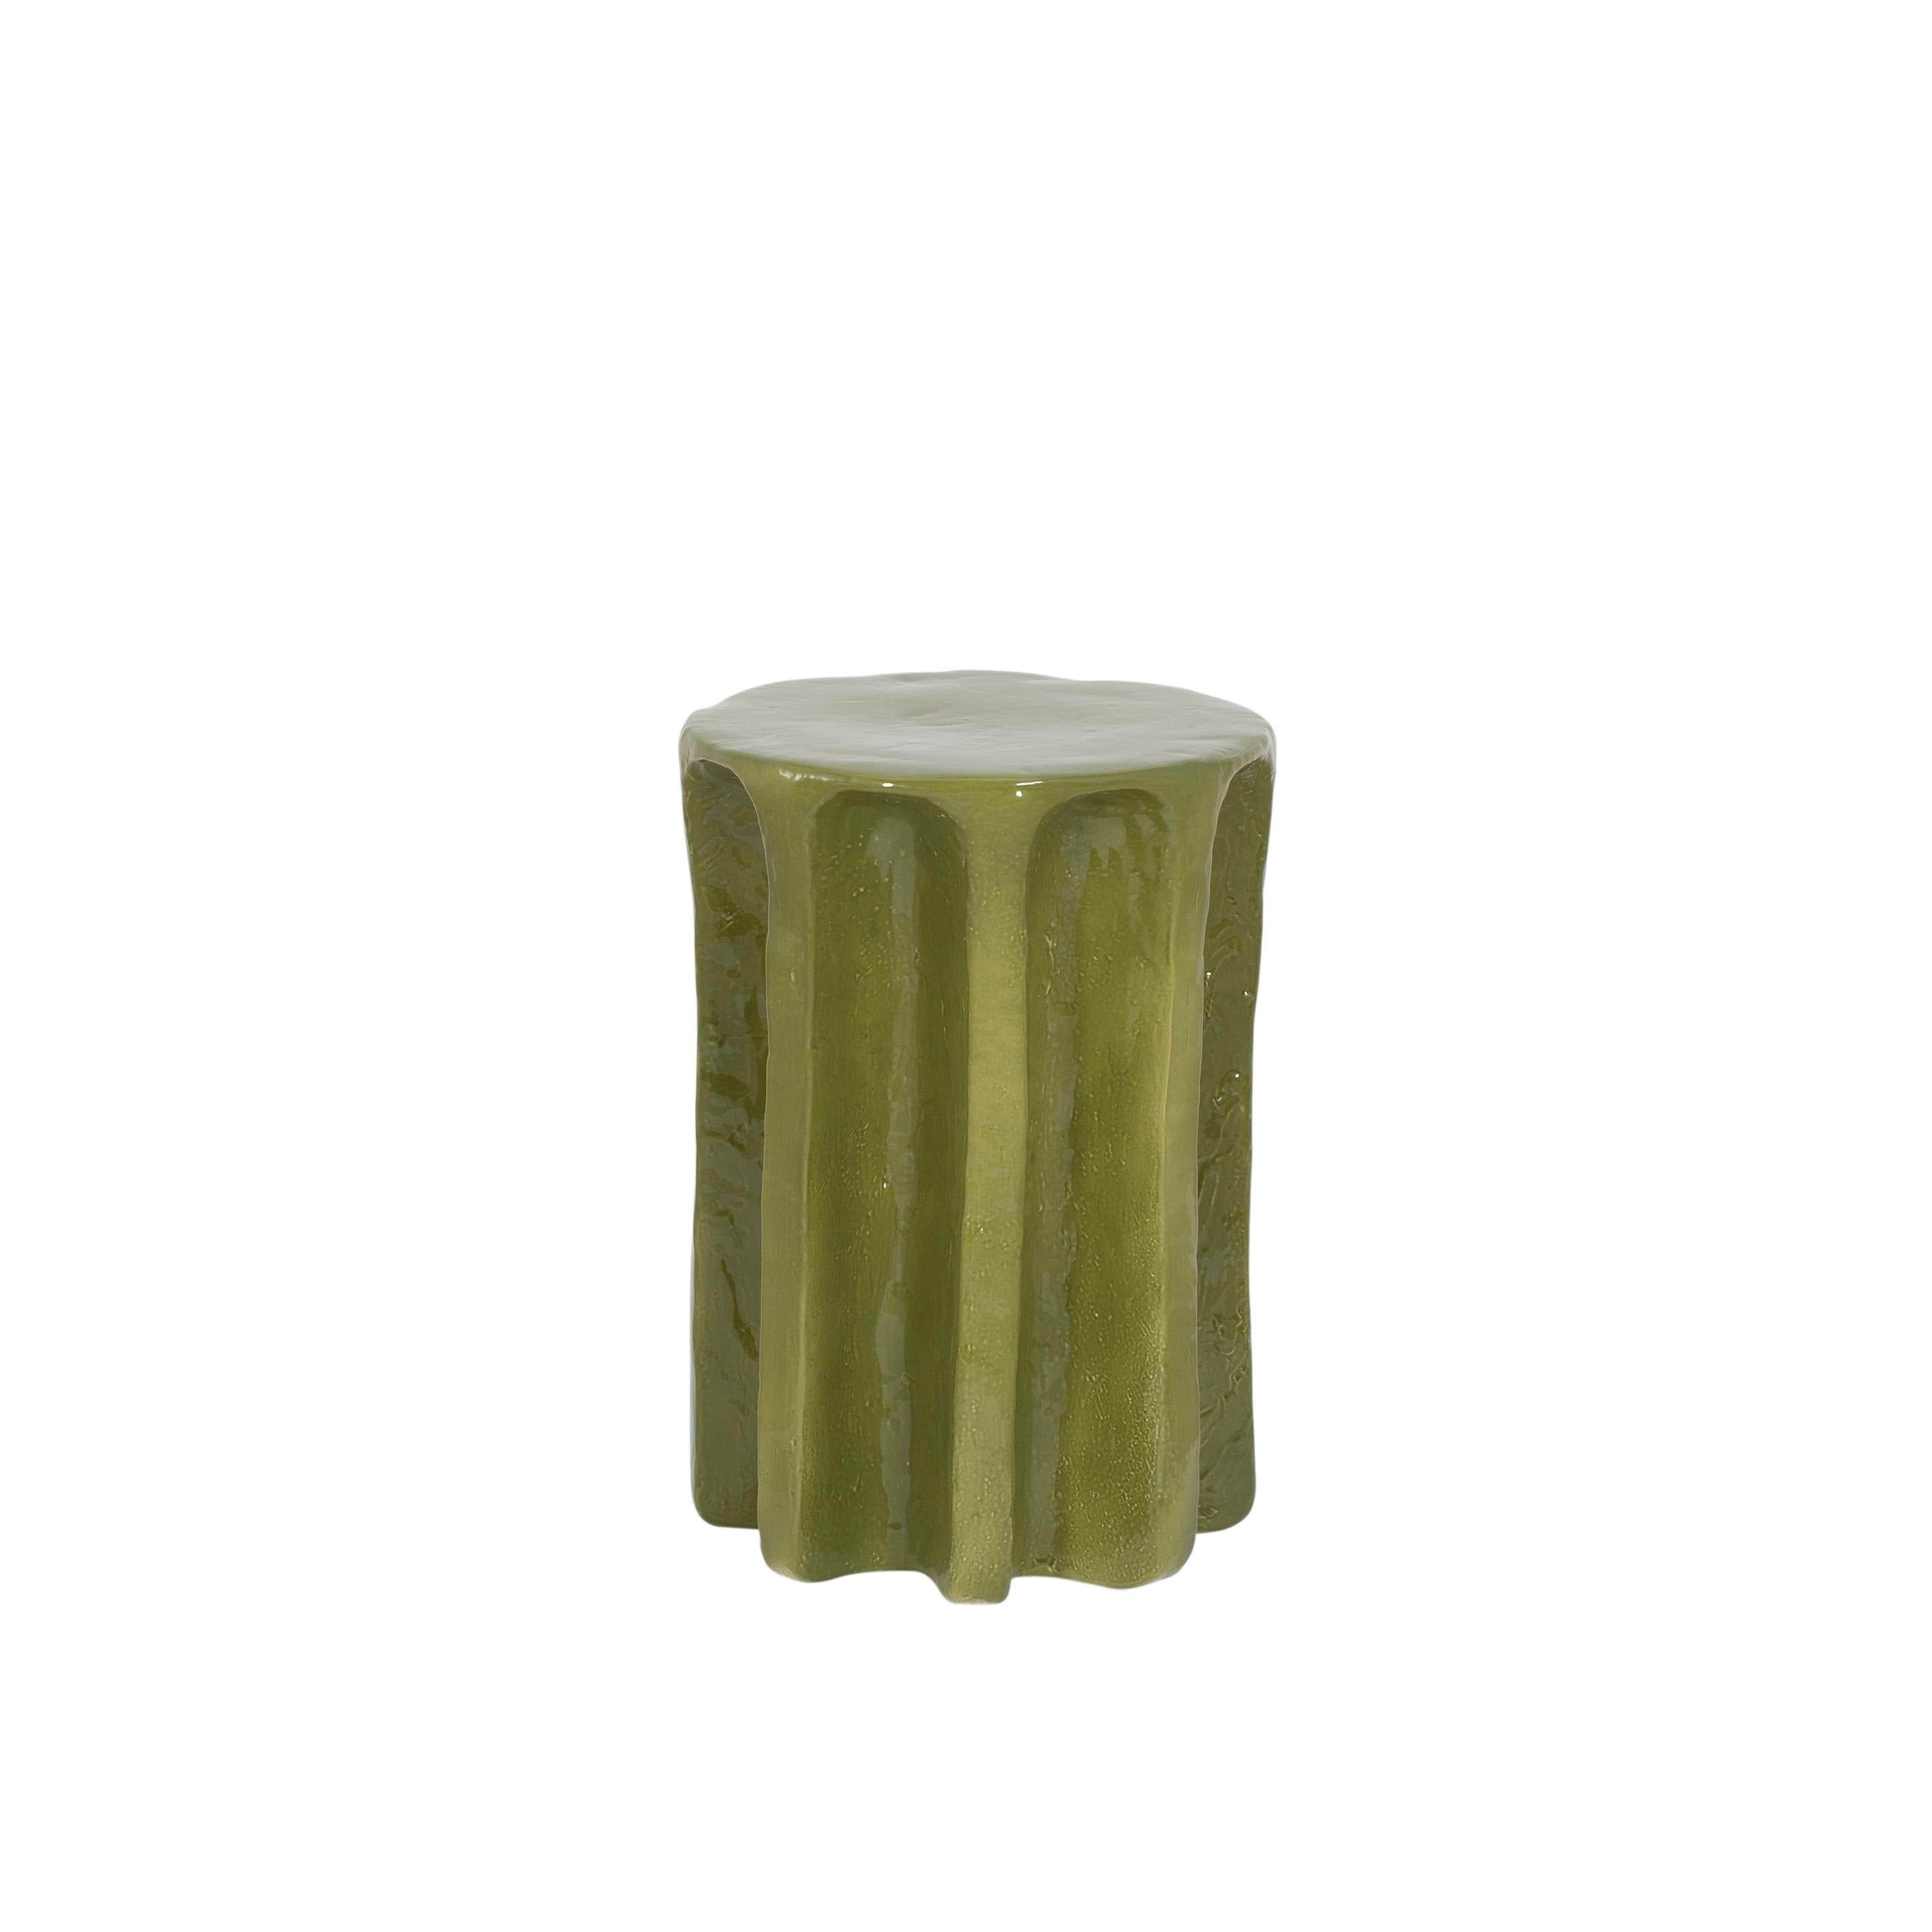 Chouchou high green side table by Pulpo
Dimensions: D39 x H57 cm
Materials: ceramic

Also available in different Colours. 

Chouchou bears the contours of an antique column – which, knowing designer Lorenzo Zanovello’s, is most likely a